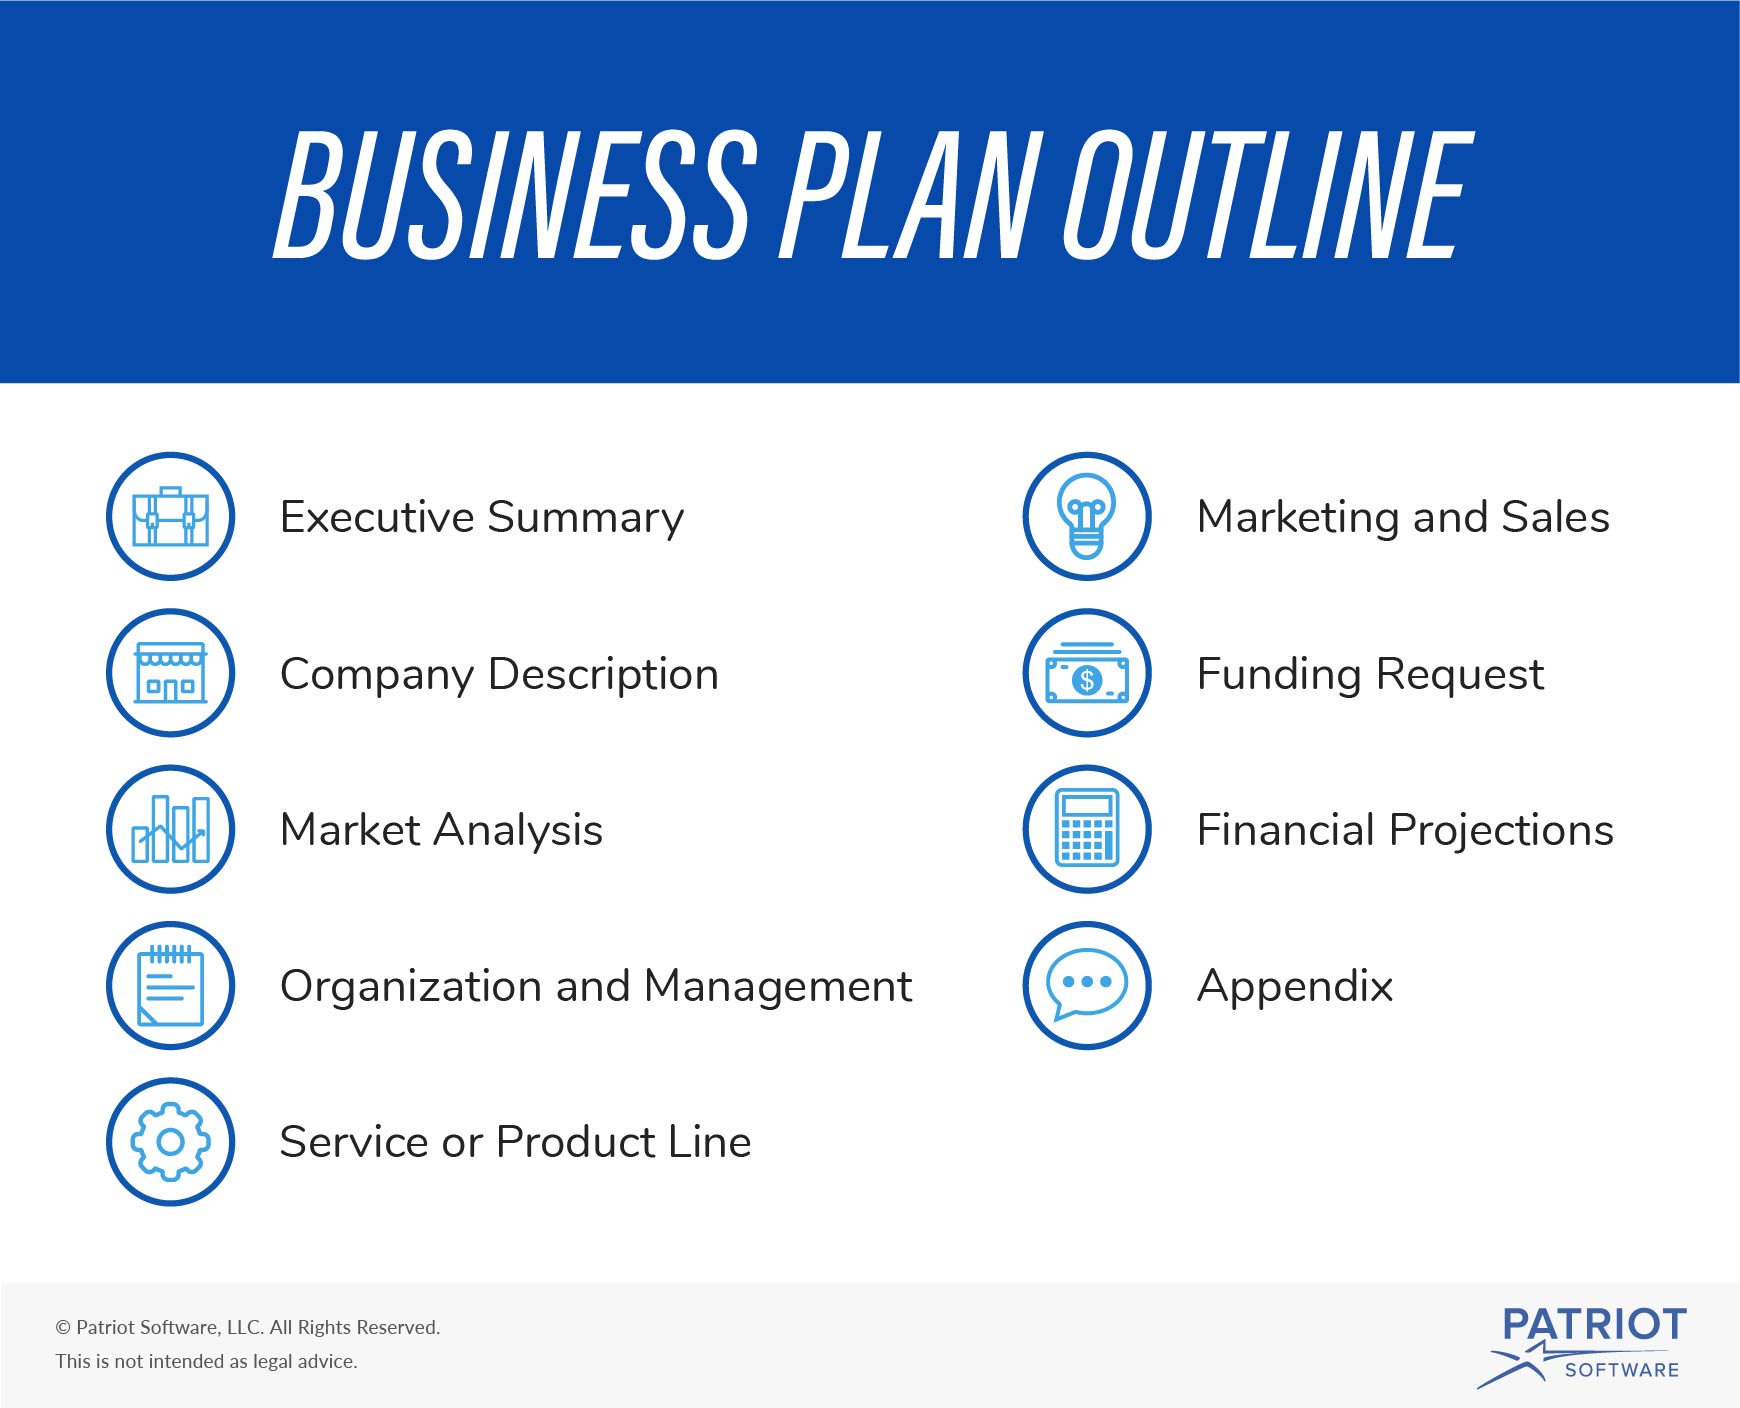 how to make effective business plan